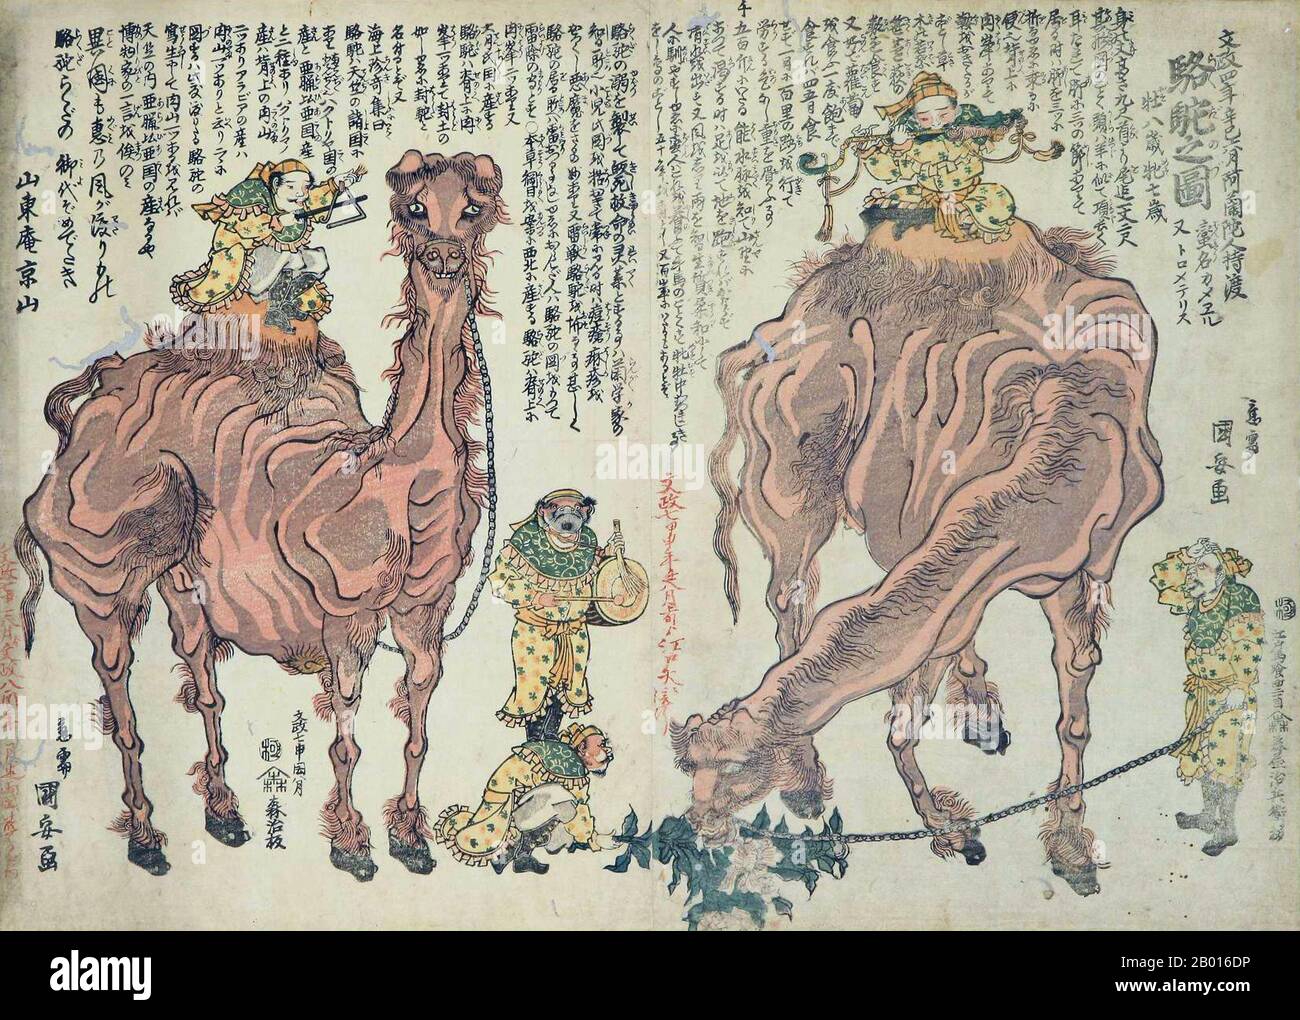 Japan: 'Camels and Musicians'. Ukiyo-e woodblock print by Utagawa Kuniyasu (1794-1832), 1824.  The camels and musicians are redolent of the Tang Dynasty and the Silk Road, especially Sogdian or Central Asian entertainers at the Tang Court.  Utagawa Kuniyasu, born Yasugoro and also known as Ipposai and Nishikawa Yasunobu, was a relatively popular Japanese artist from the Utagawa school. He was taught by Utagawa Toyokuni, and illustrated around a hundred books throughout his career. He also designed hundreds of stand-alone prints of actors (yakusha-e) and beauties (bijing-ga). Stock Photo